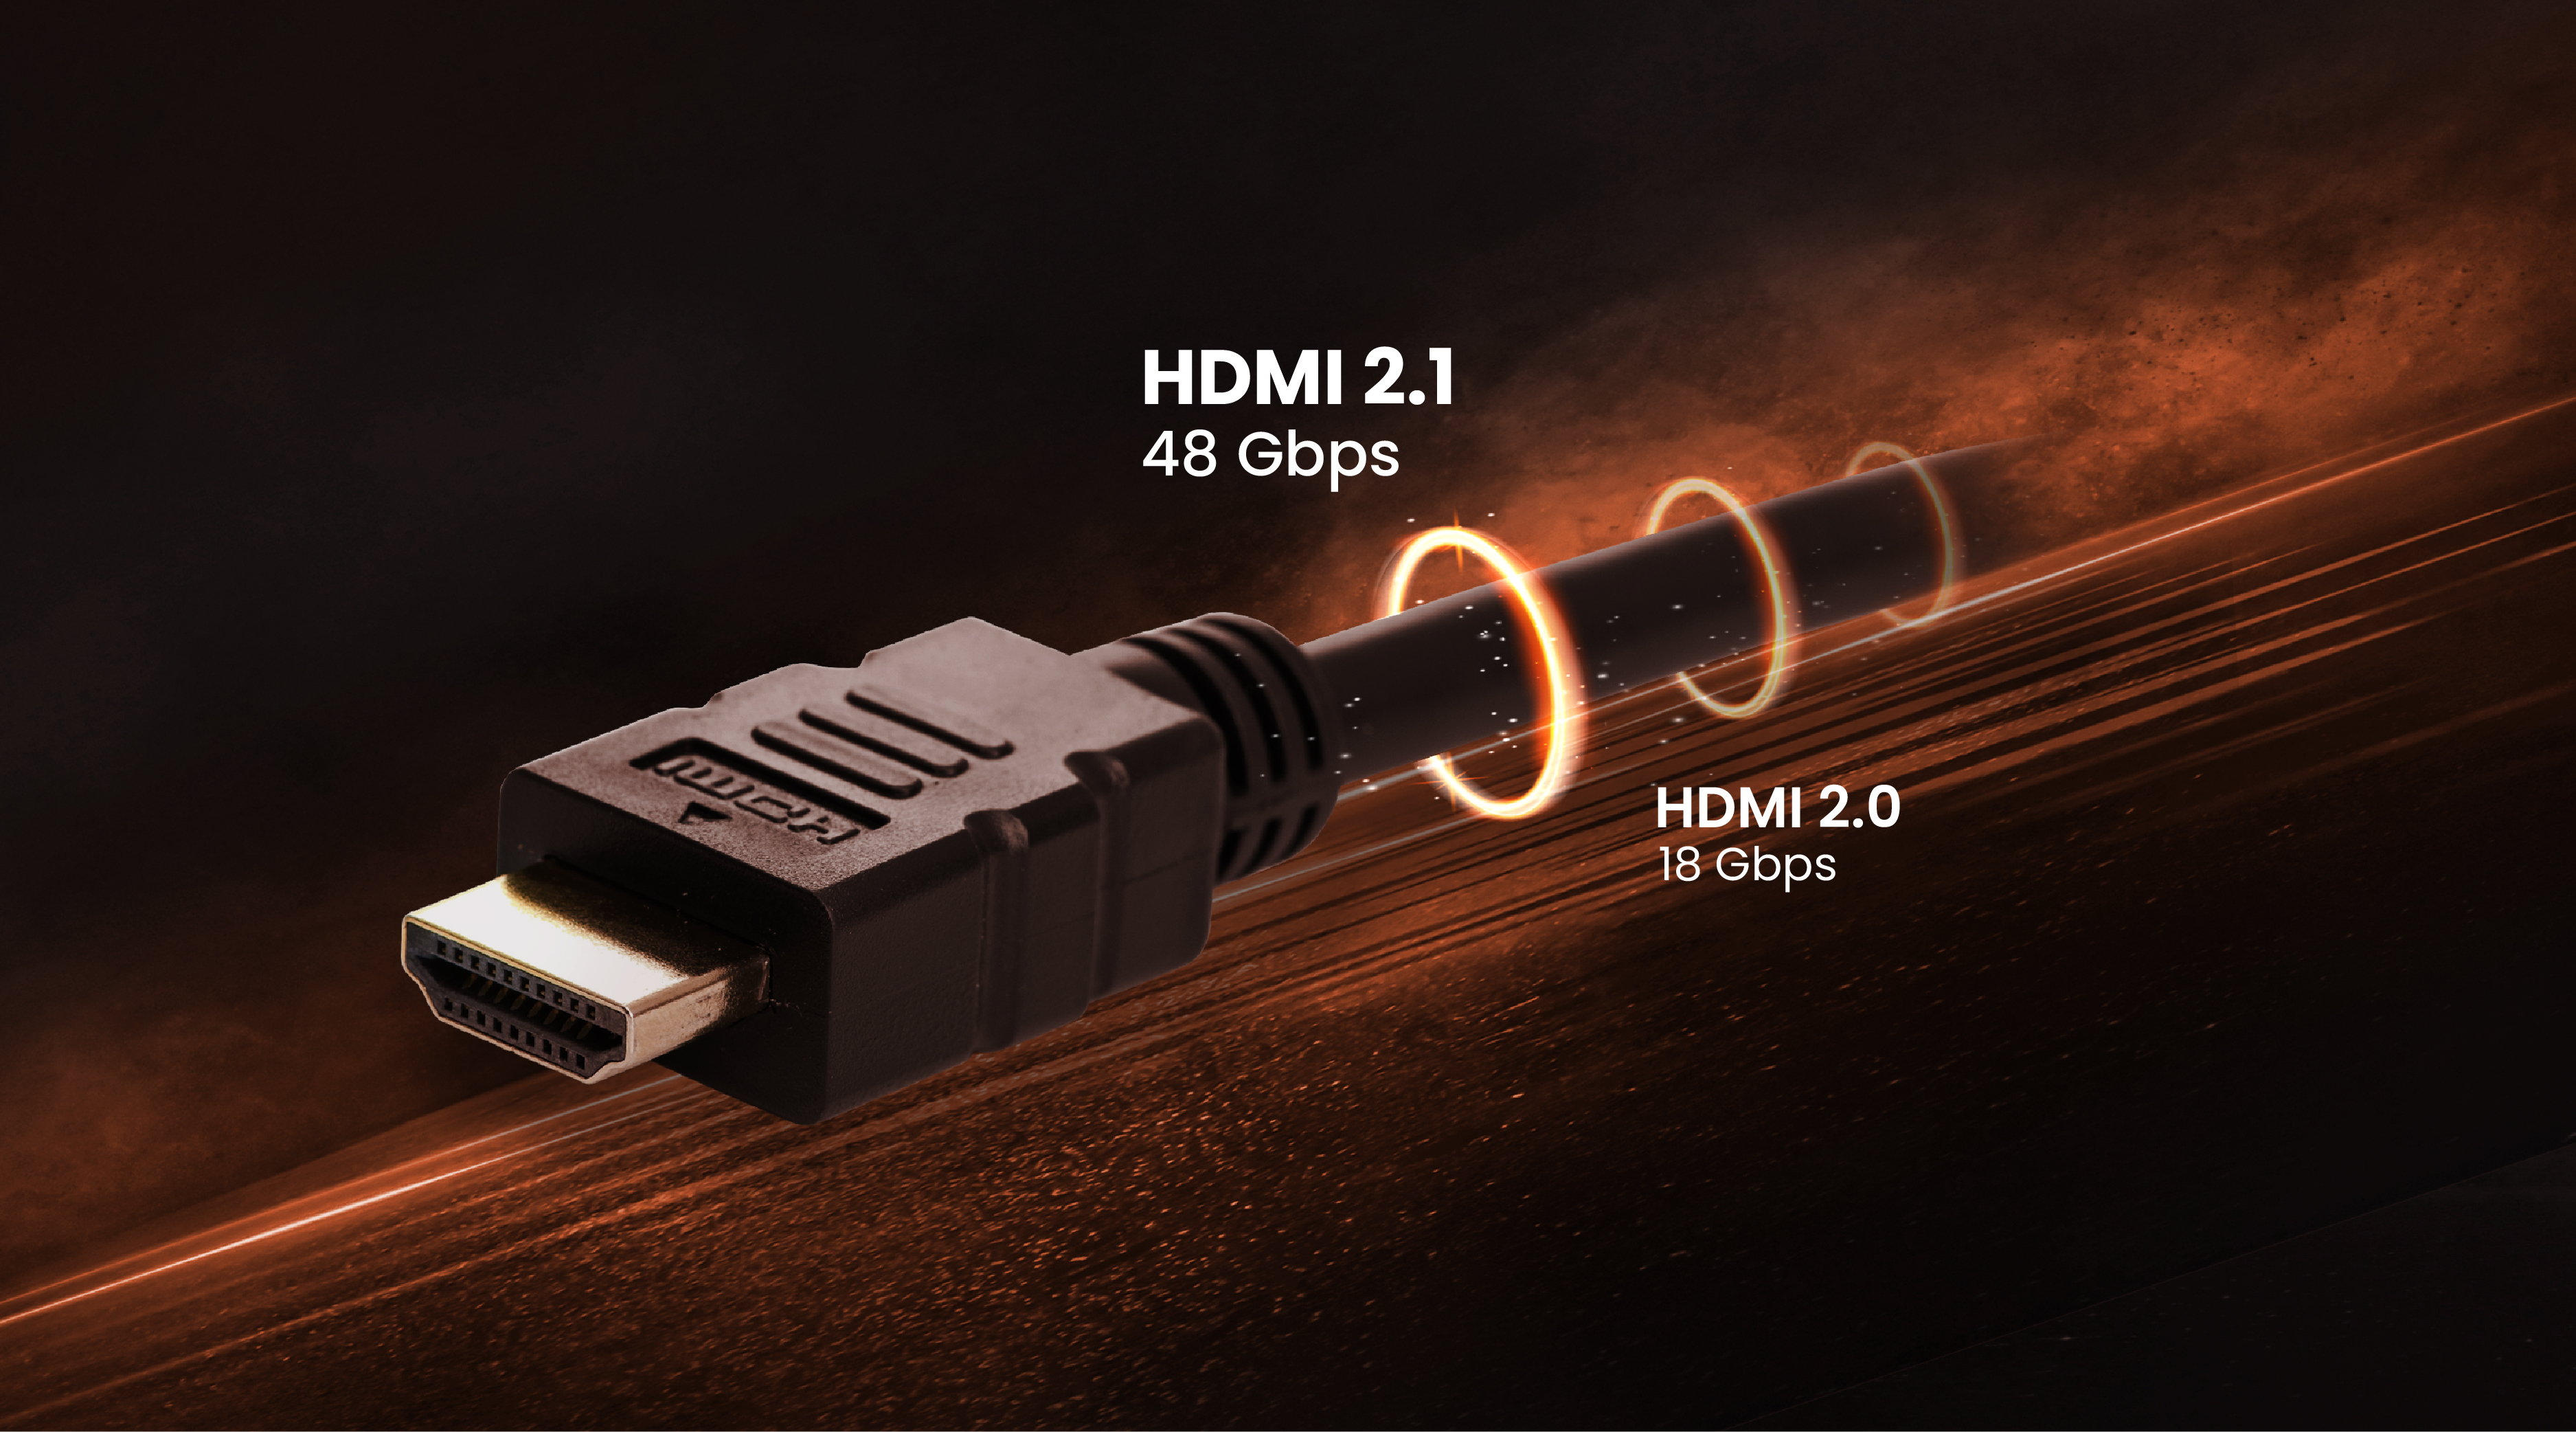 When Do I Really Need HDMI 2.1 or Is HDMI 2.0 Enough? | BenQ UK